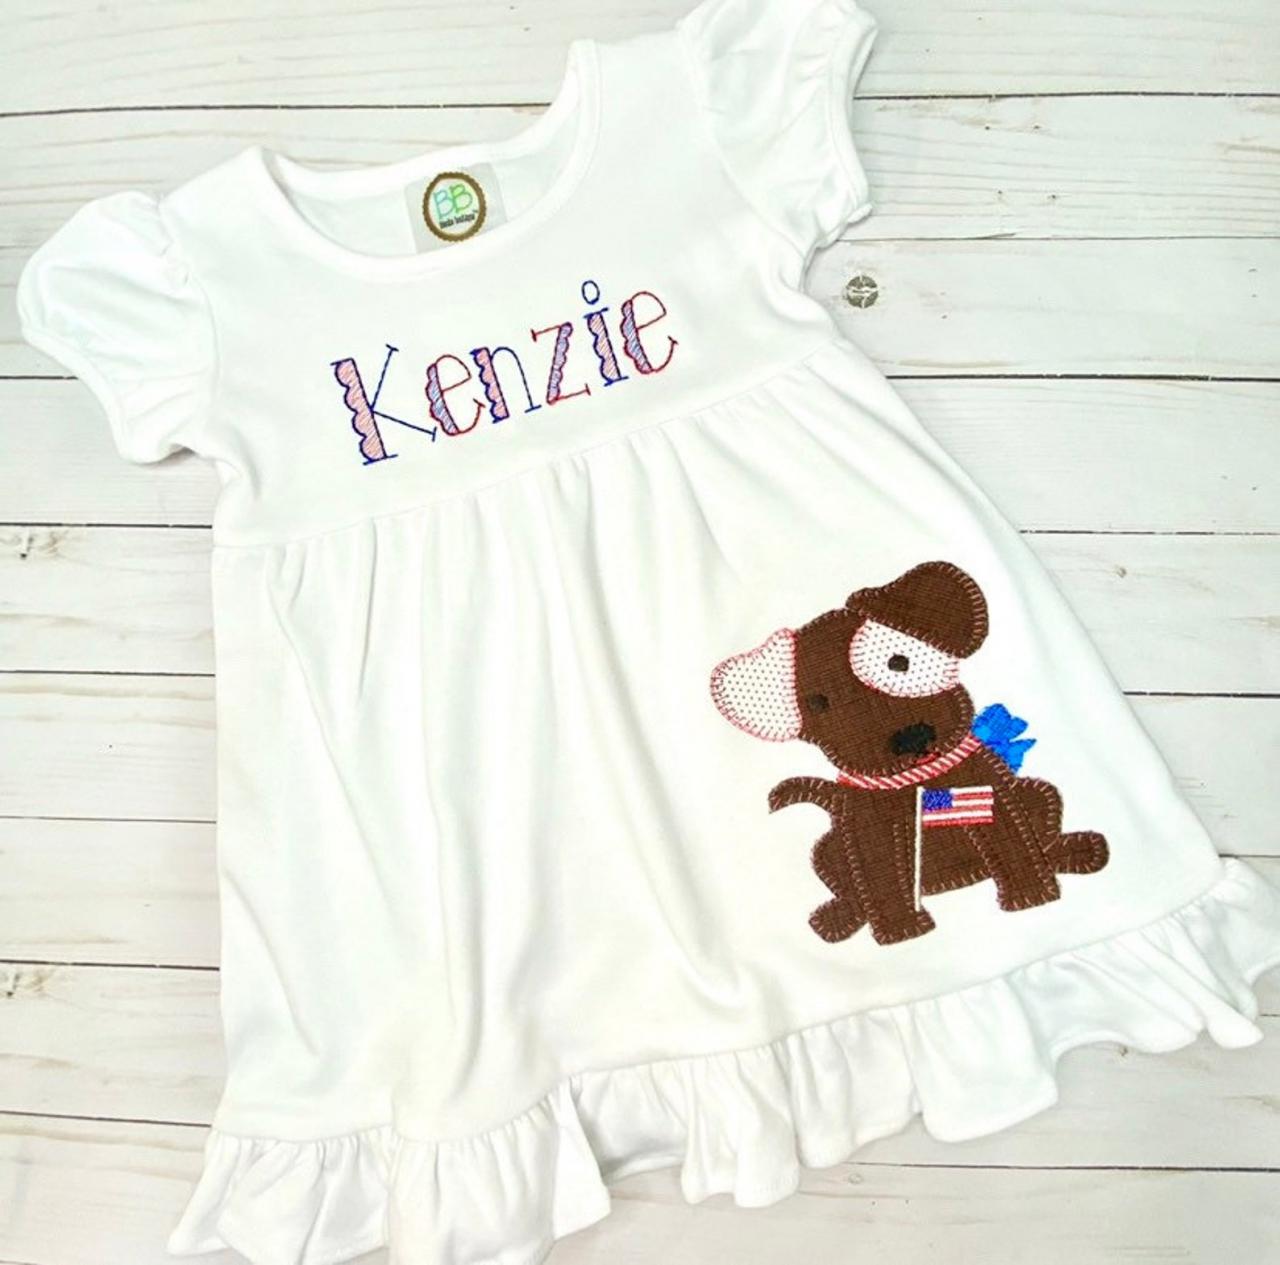 Patriotic Puppy Dress / Embroidered Patriotic Dress / Patriotic Dog Dress / Custom Embroidered Ruffle Dress / Independence Day / Monogram